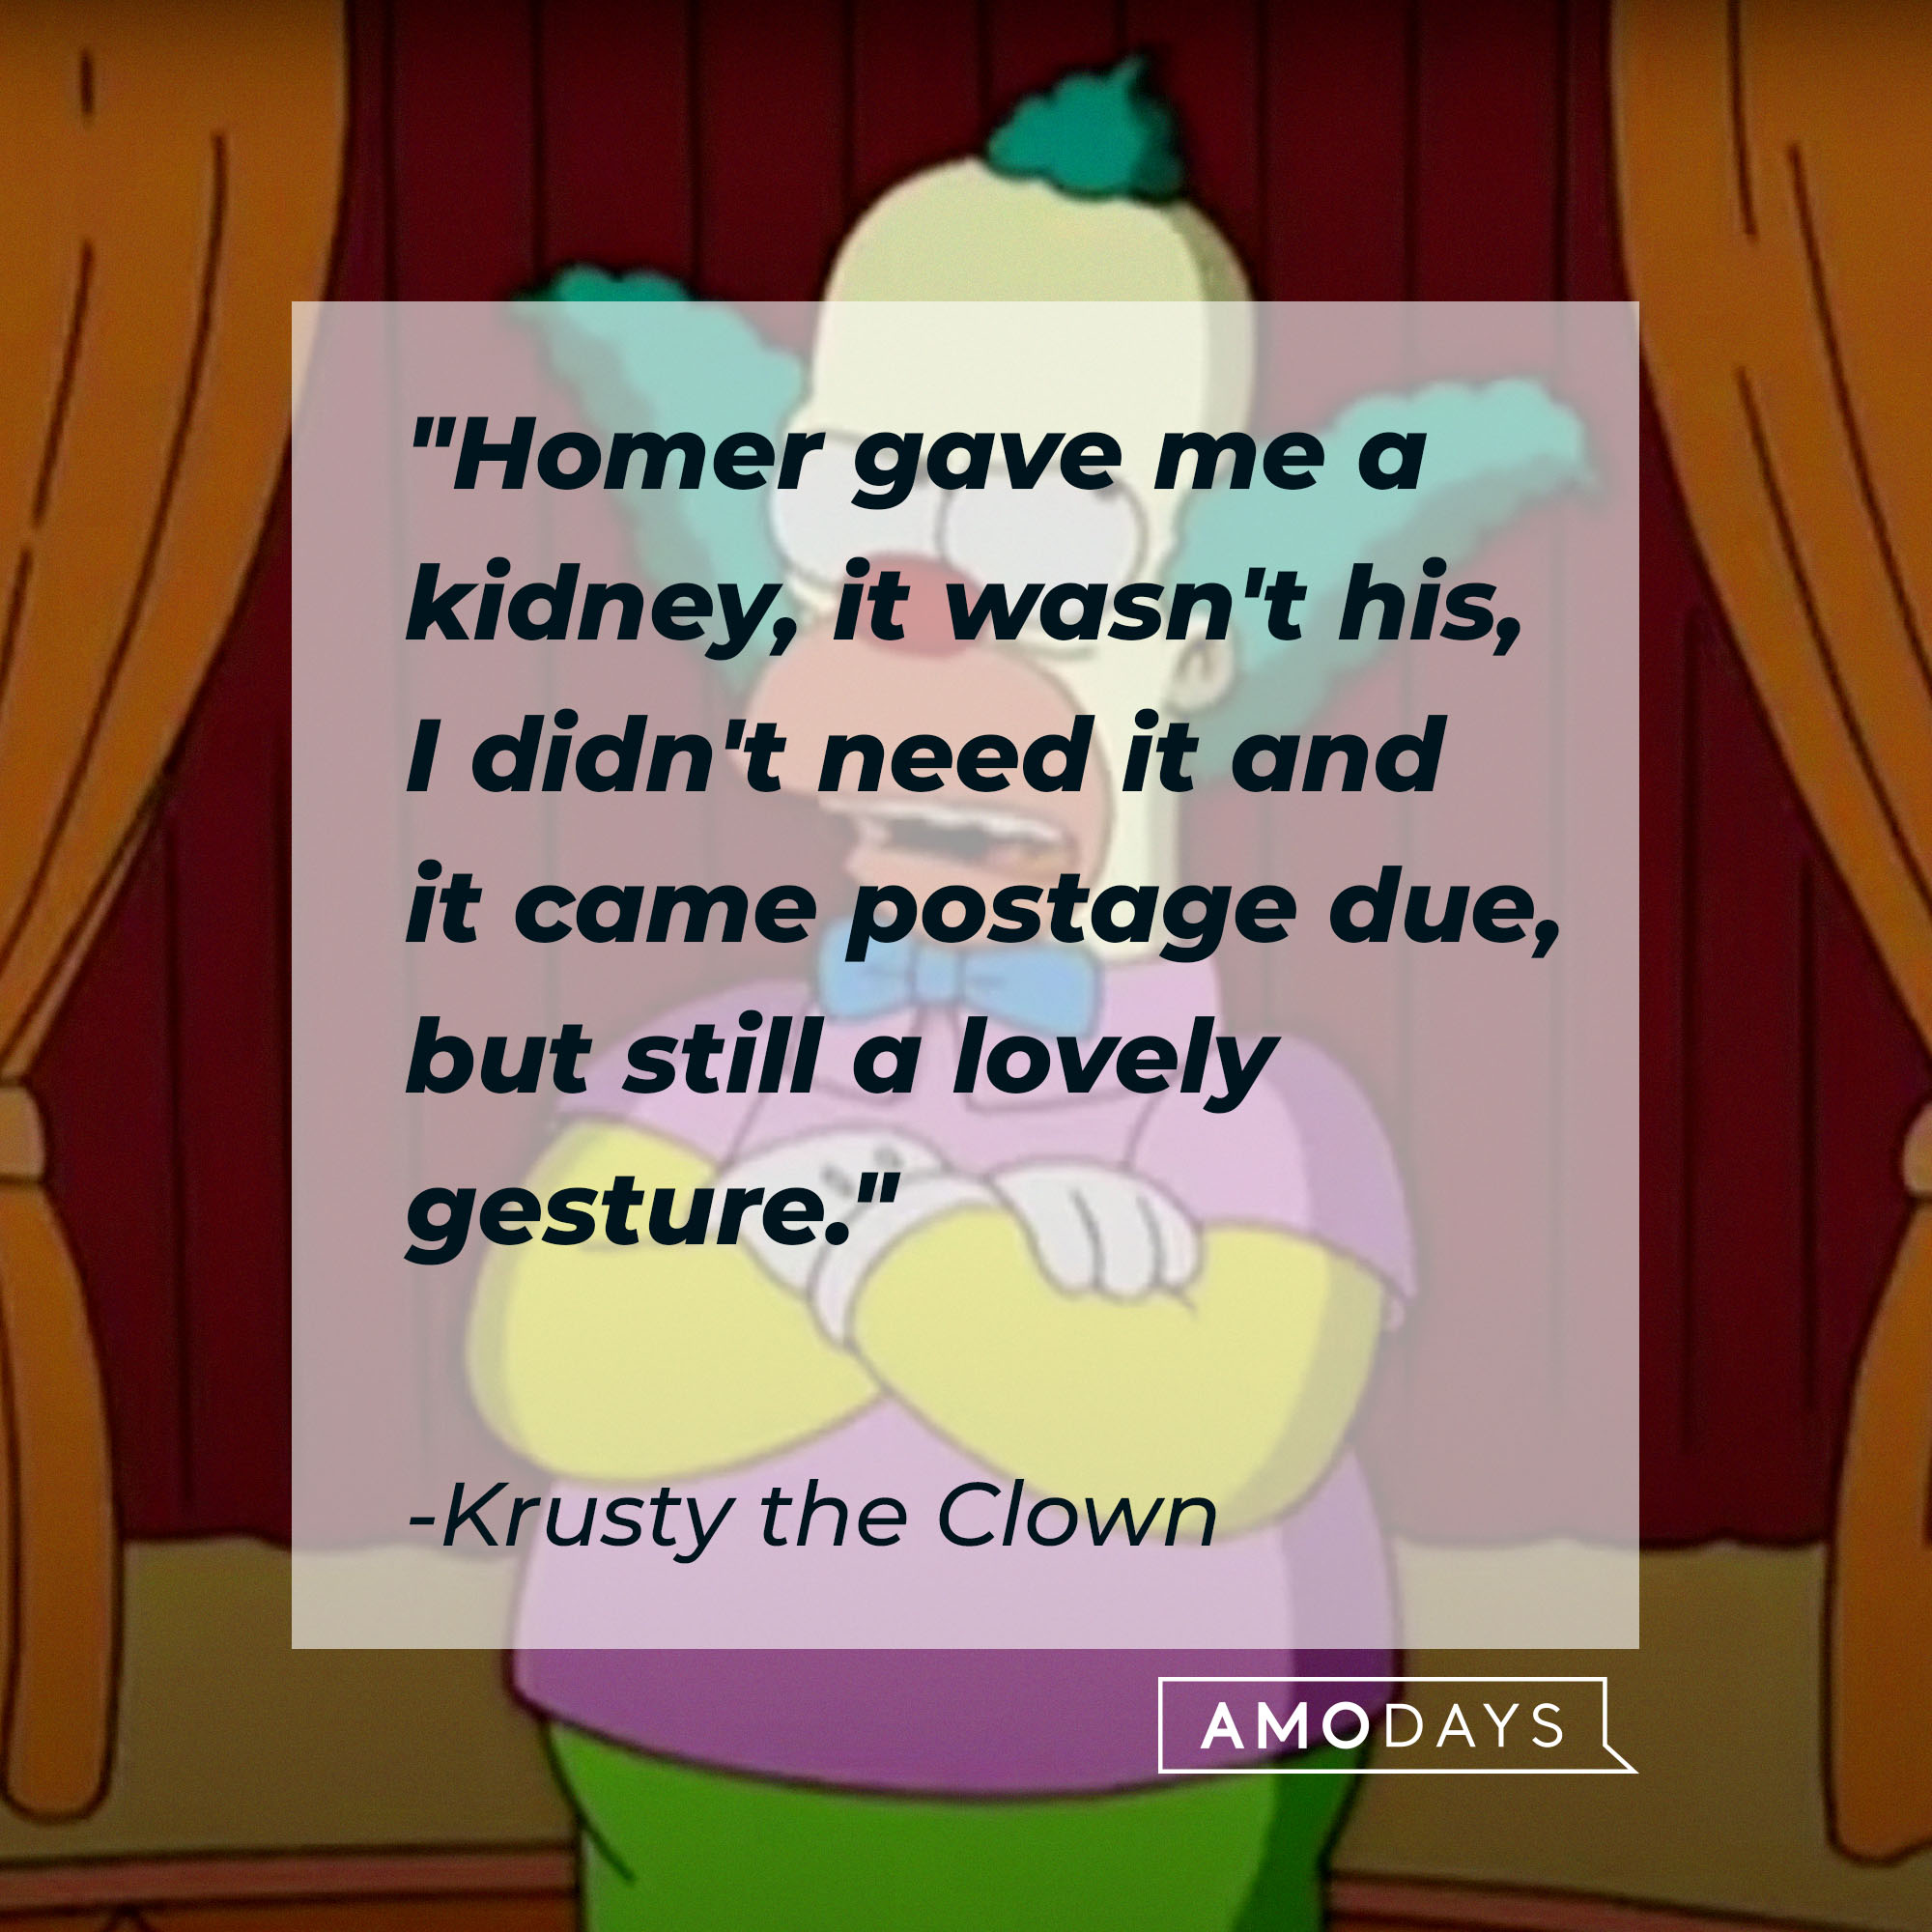 Krusty the Clown's quote: "Homer gave me a kidney, it wasn't his, I didn't need it and it came postage due, but still a lovely gesture" | Source: Facebook.com/TheSimpsons